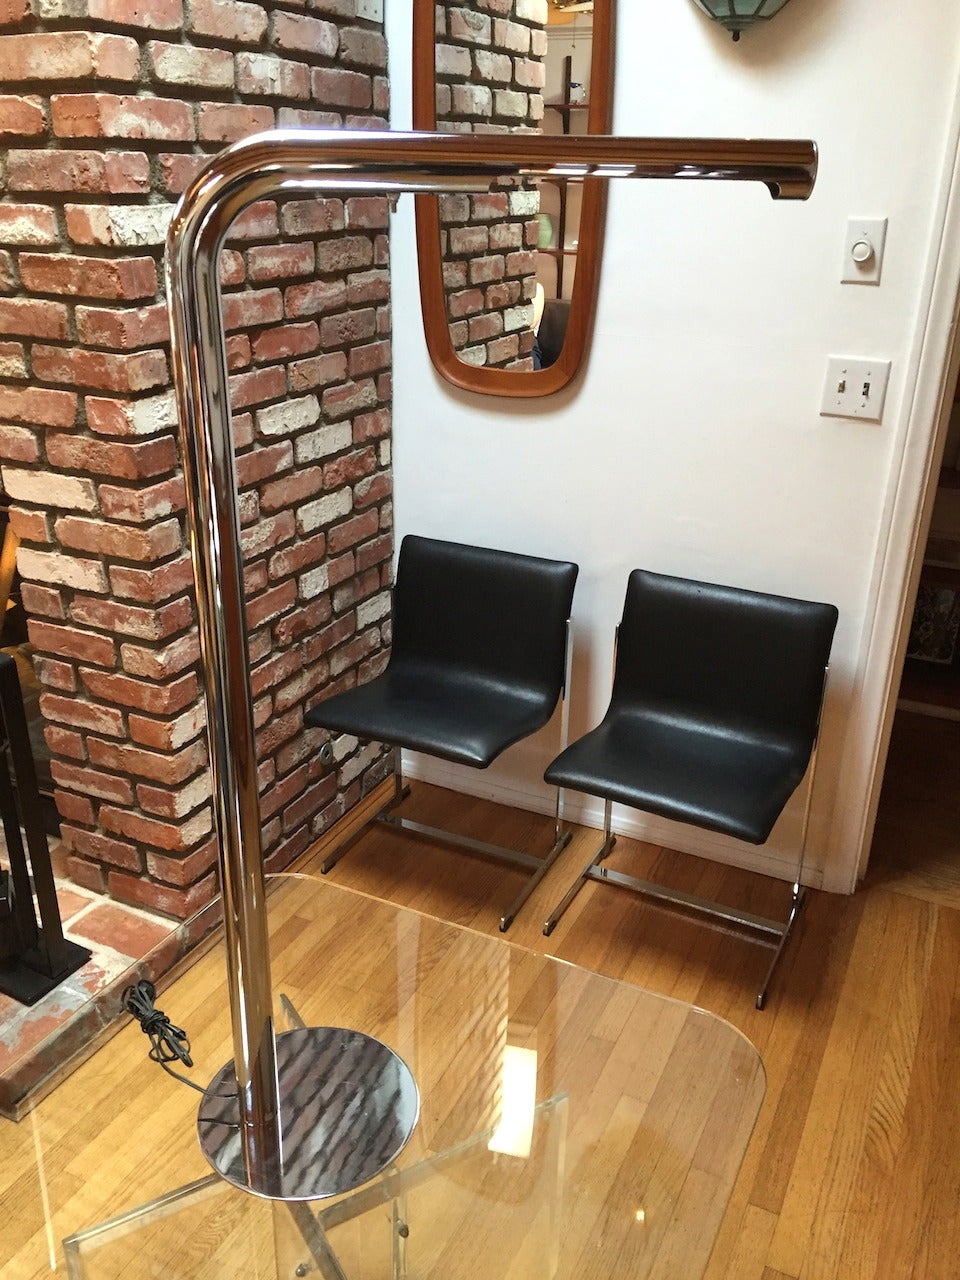 Chrome floor lamp by Sonneman. Good original condition with minor age appropriate wear to chrome as pictured.